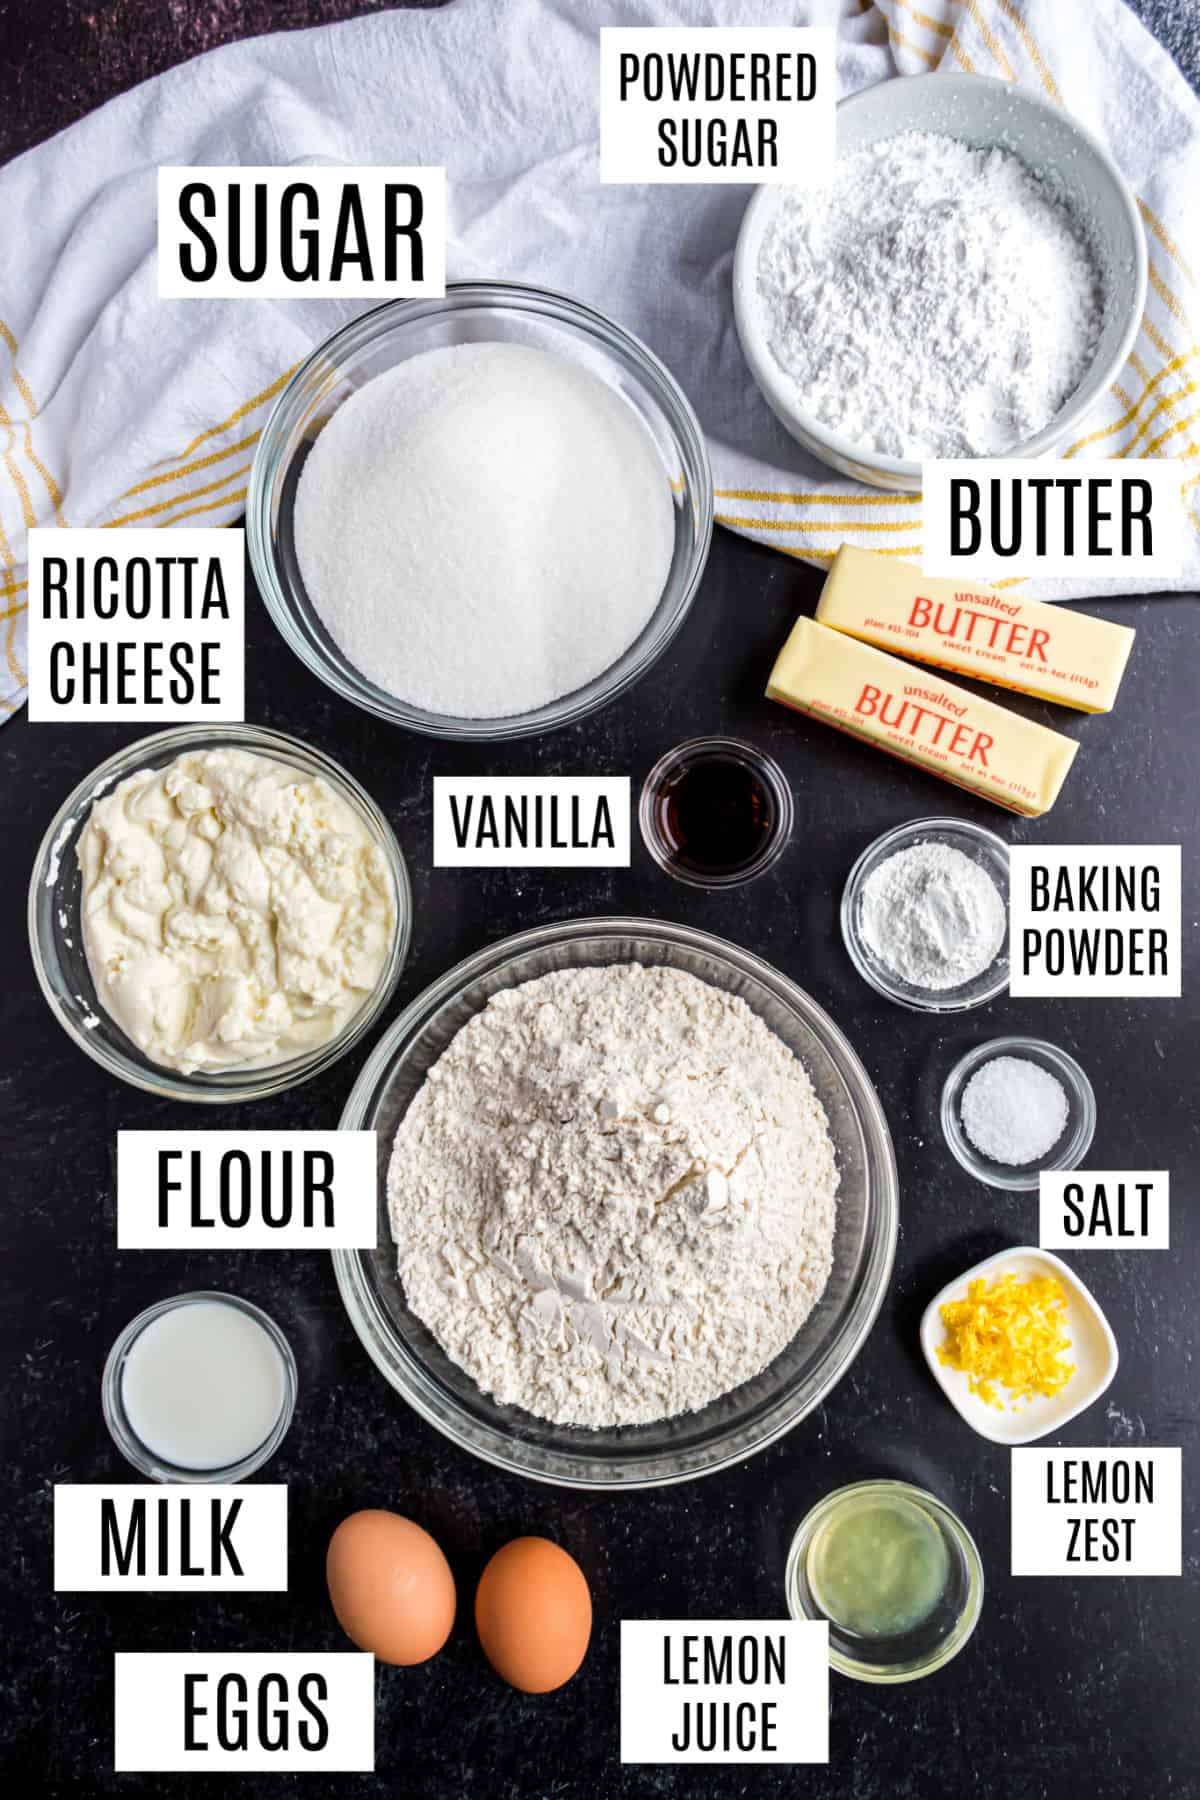 Ingredients needed to make homemade ricotta cookies.